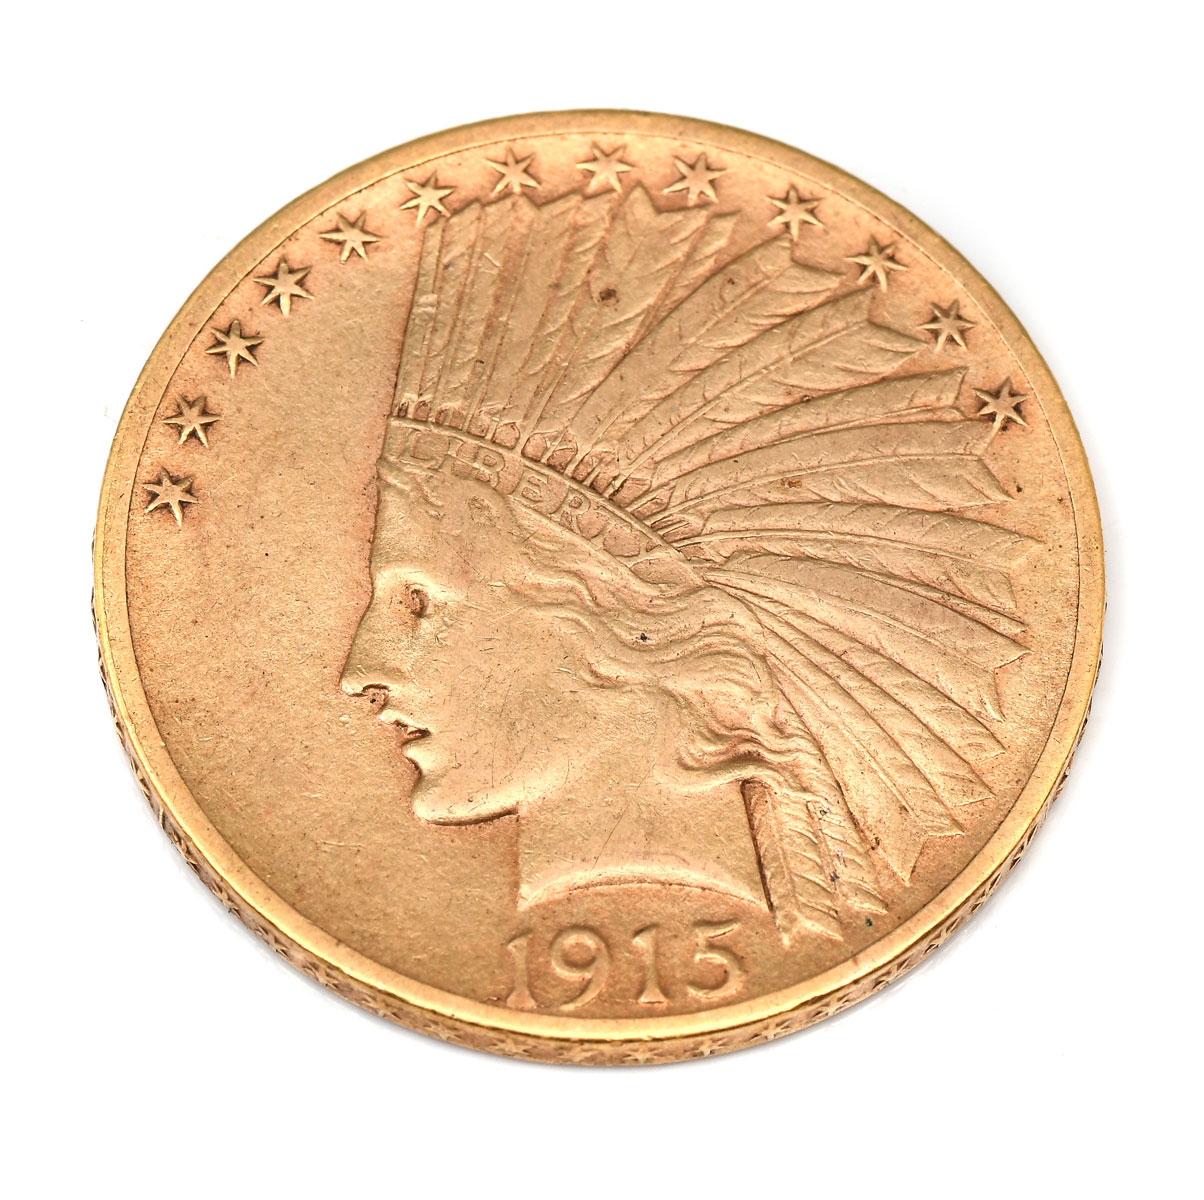 INDIAN 1915 10 GOLD COIN Resides 274d23